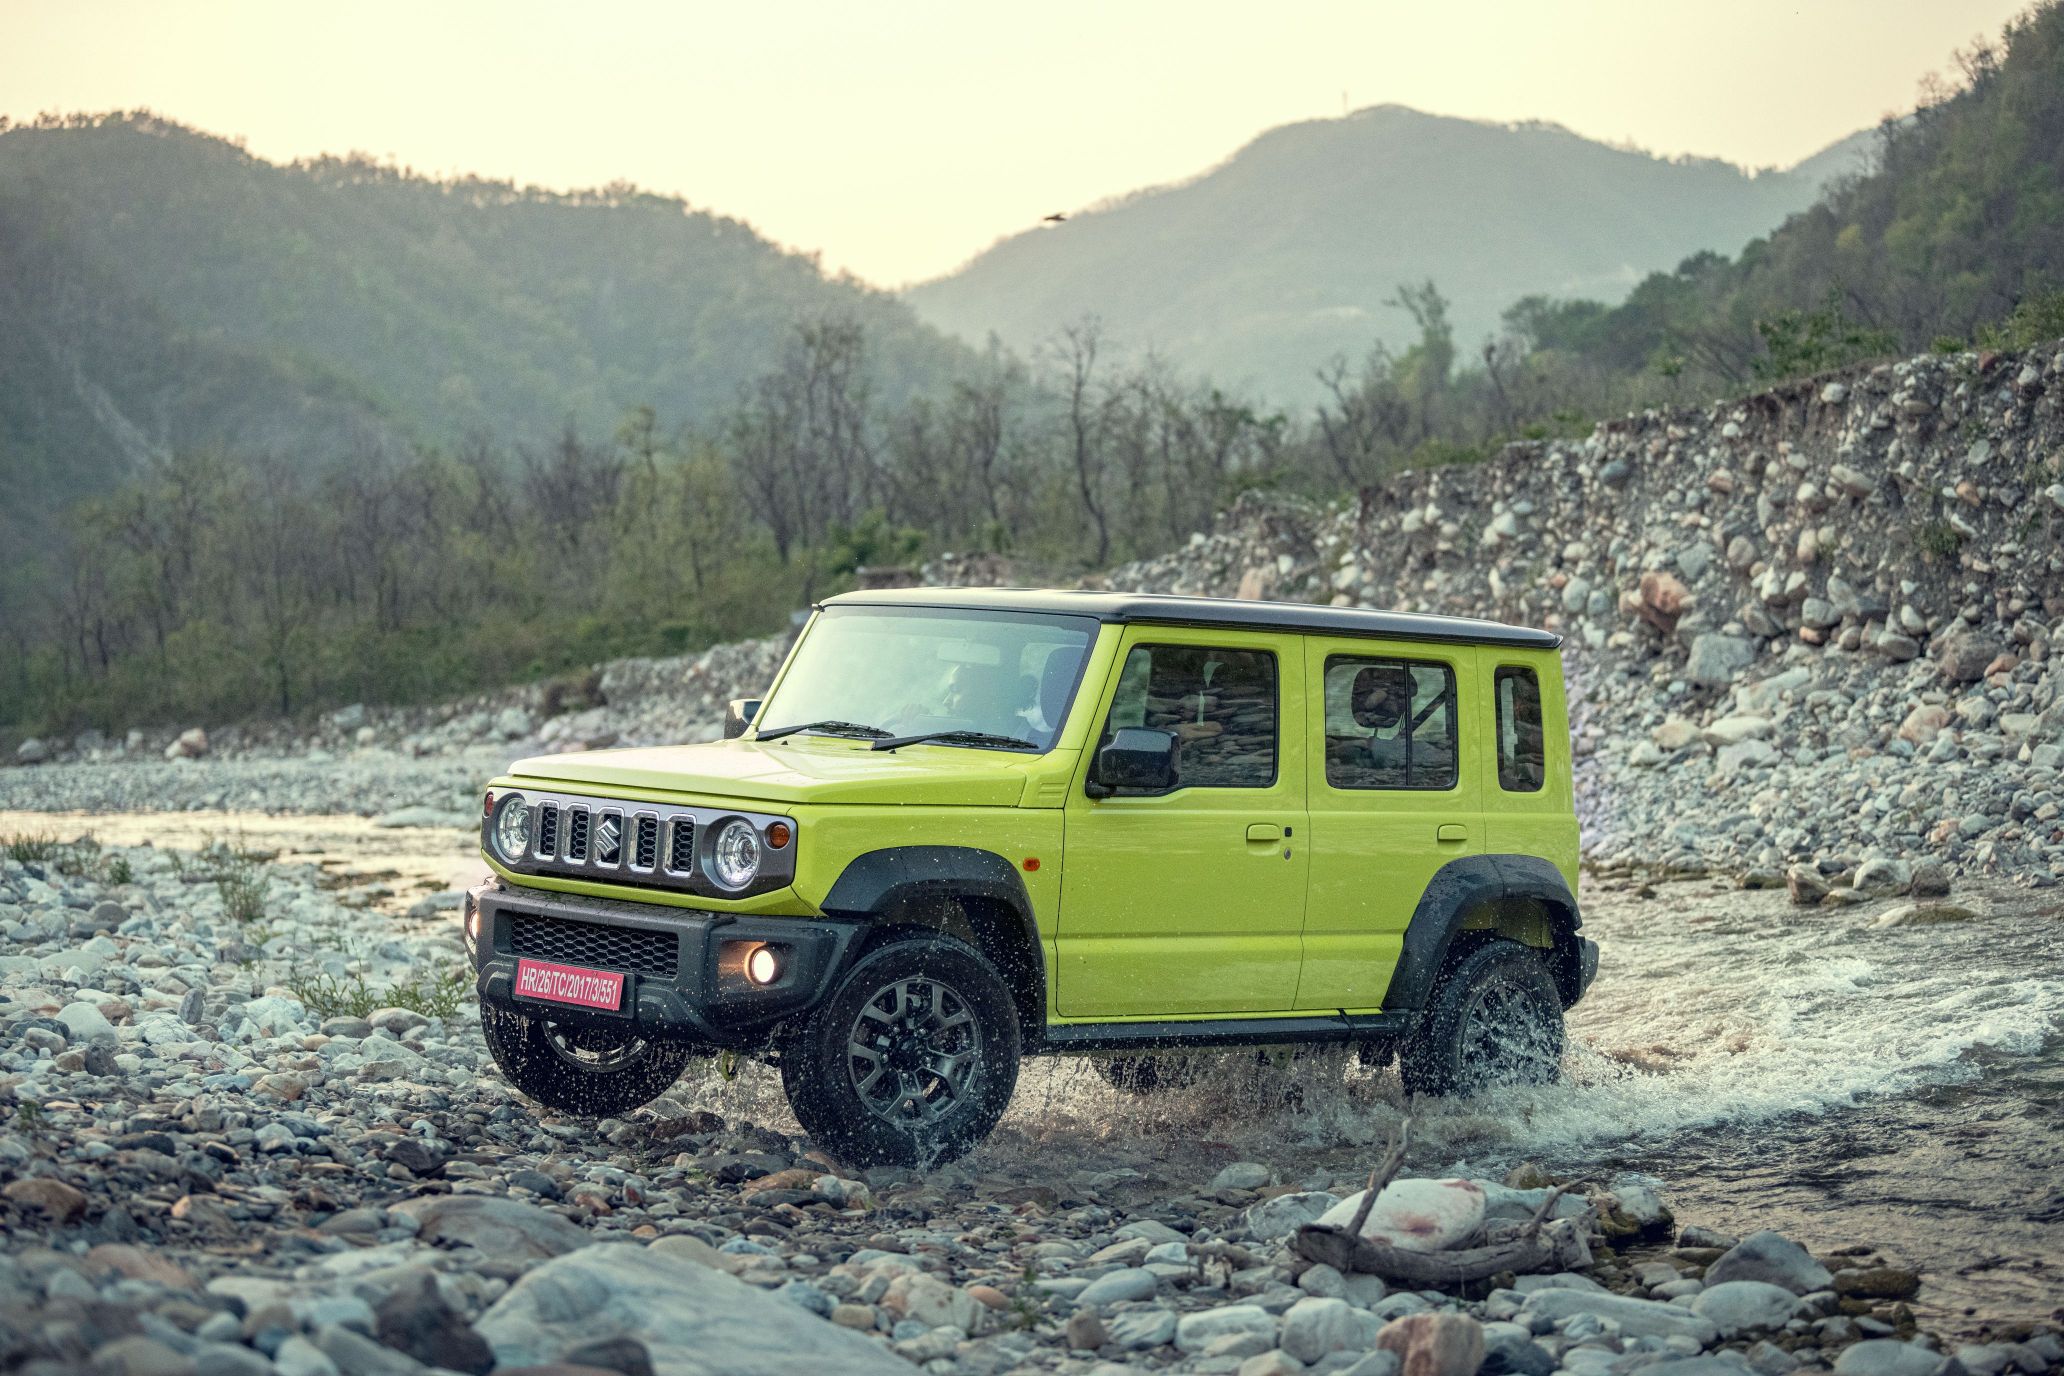 Made-In India Maruti Suzuki Jimny Is More Expensive In South Africa